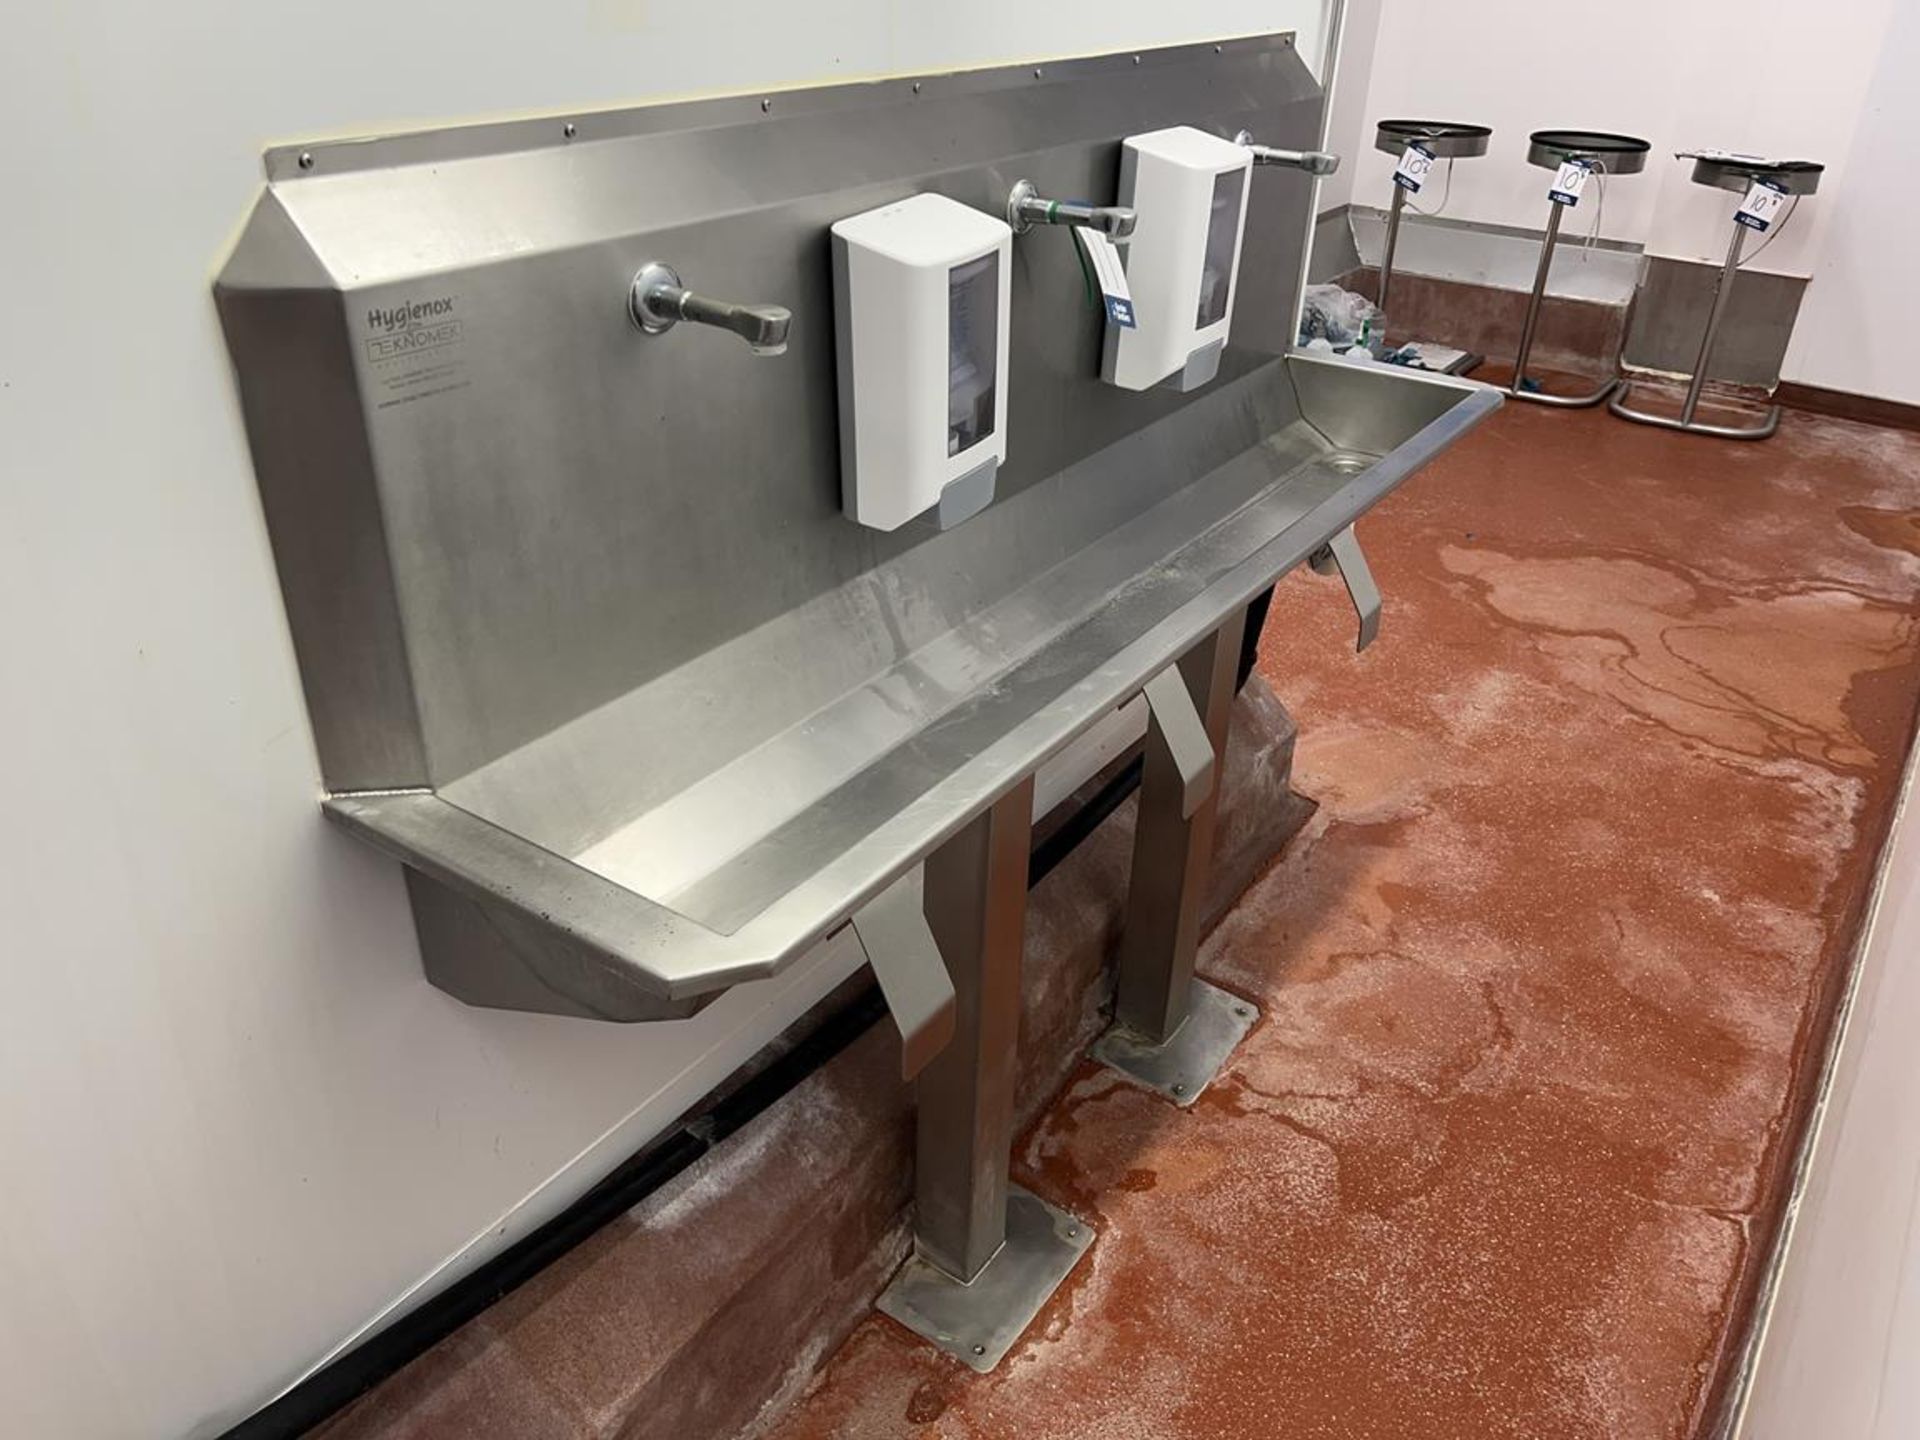 Hygienox Teknomek, three position, knee operated, stainless steel sink unit, 1.6m x 380mm x 1.3m (H) - Image 2 of 10